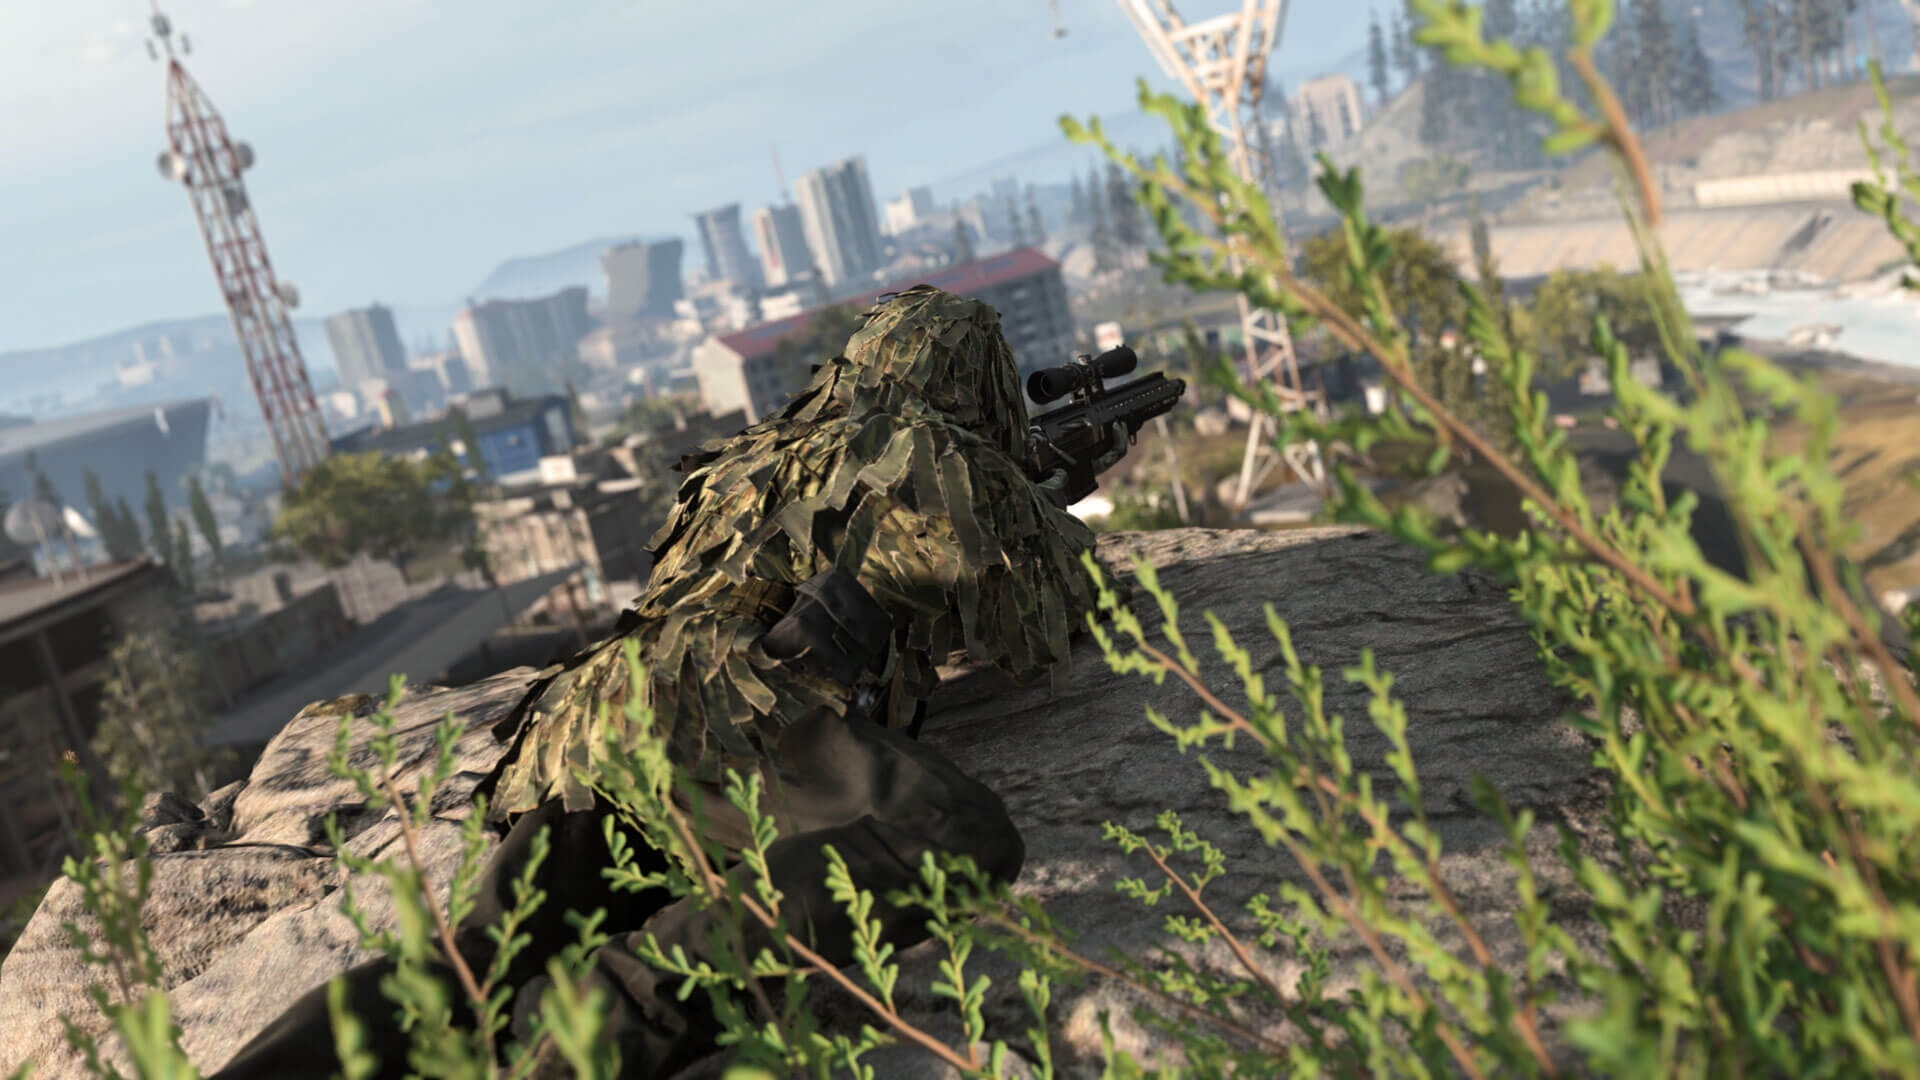 With thousands of players trying to play Modern Warfare 2, there are bound to be issues with the game and A Player That Your Platform Denies MW2 is one of...